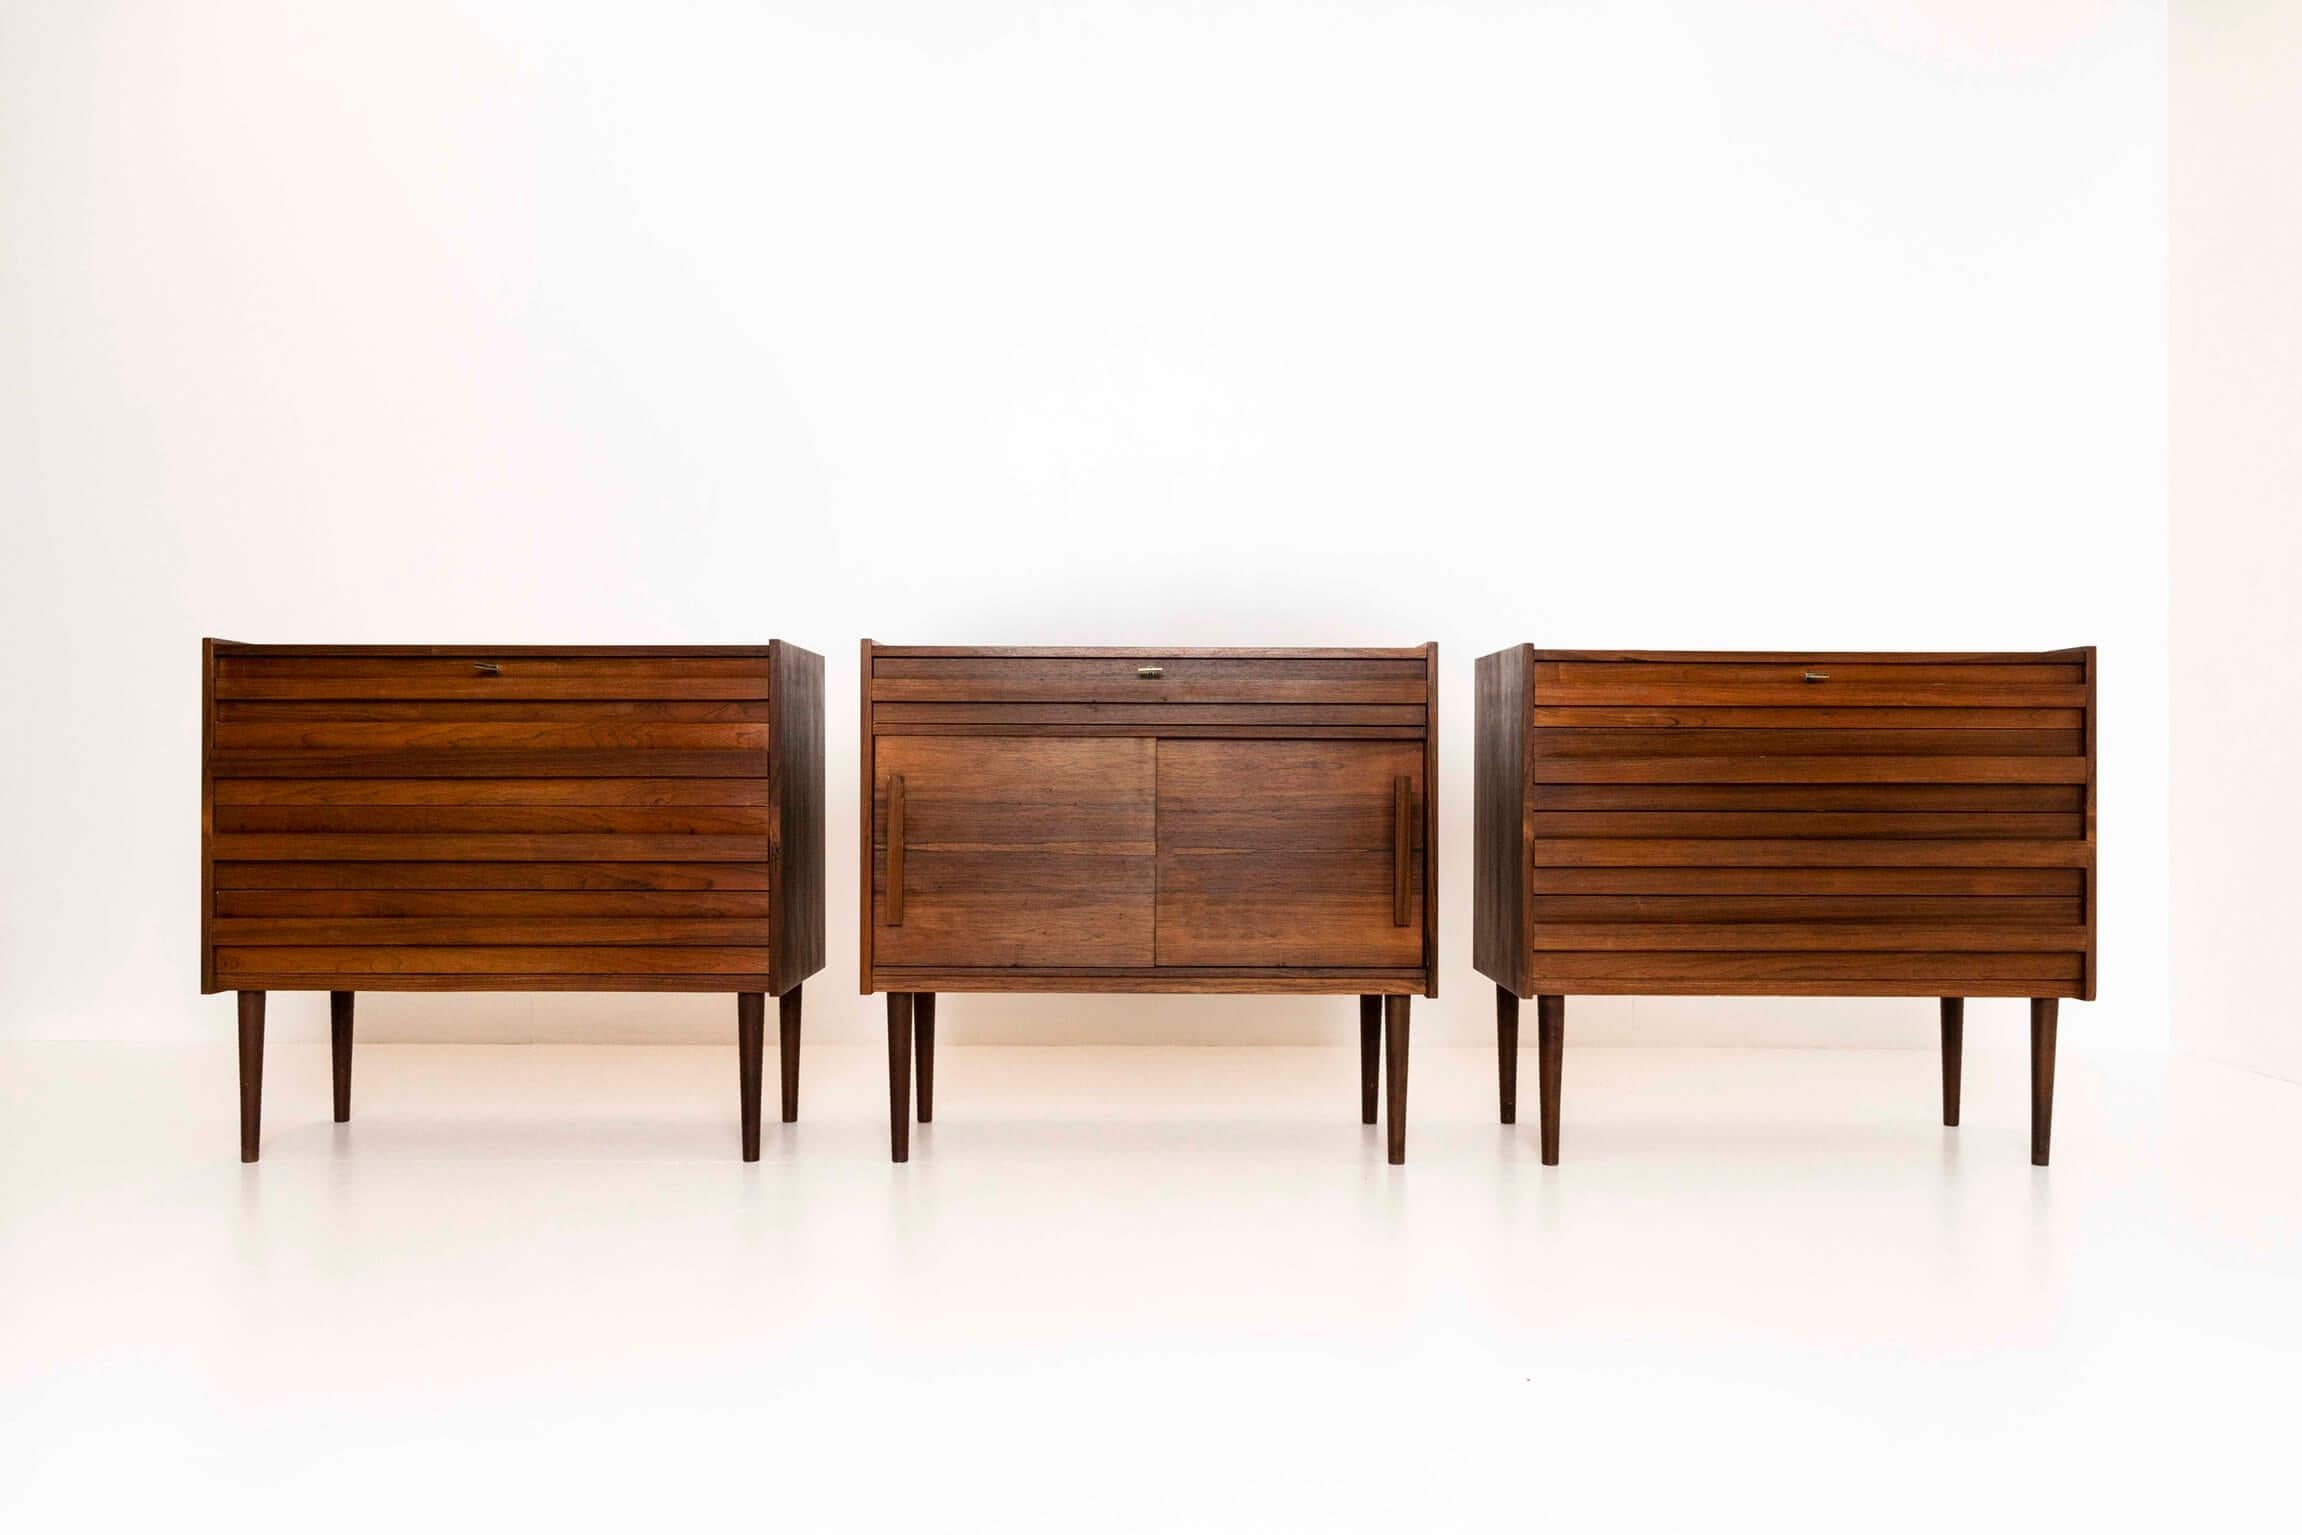 Rare set of three vintage cabinets in veneered rosewood from Denmark, most probably the 1960s. This set consists of two identical chests of drawers and a small dresser. The cabinets can be used all together as a sideboard or separate in a room. The